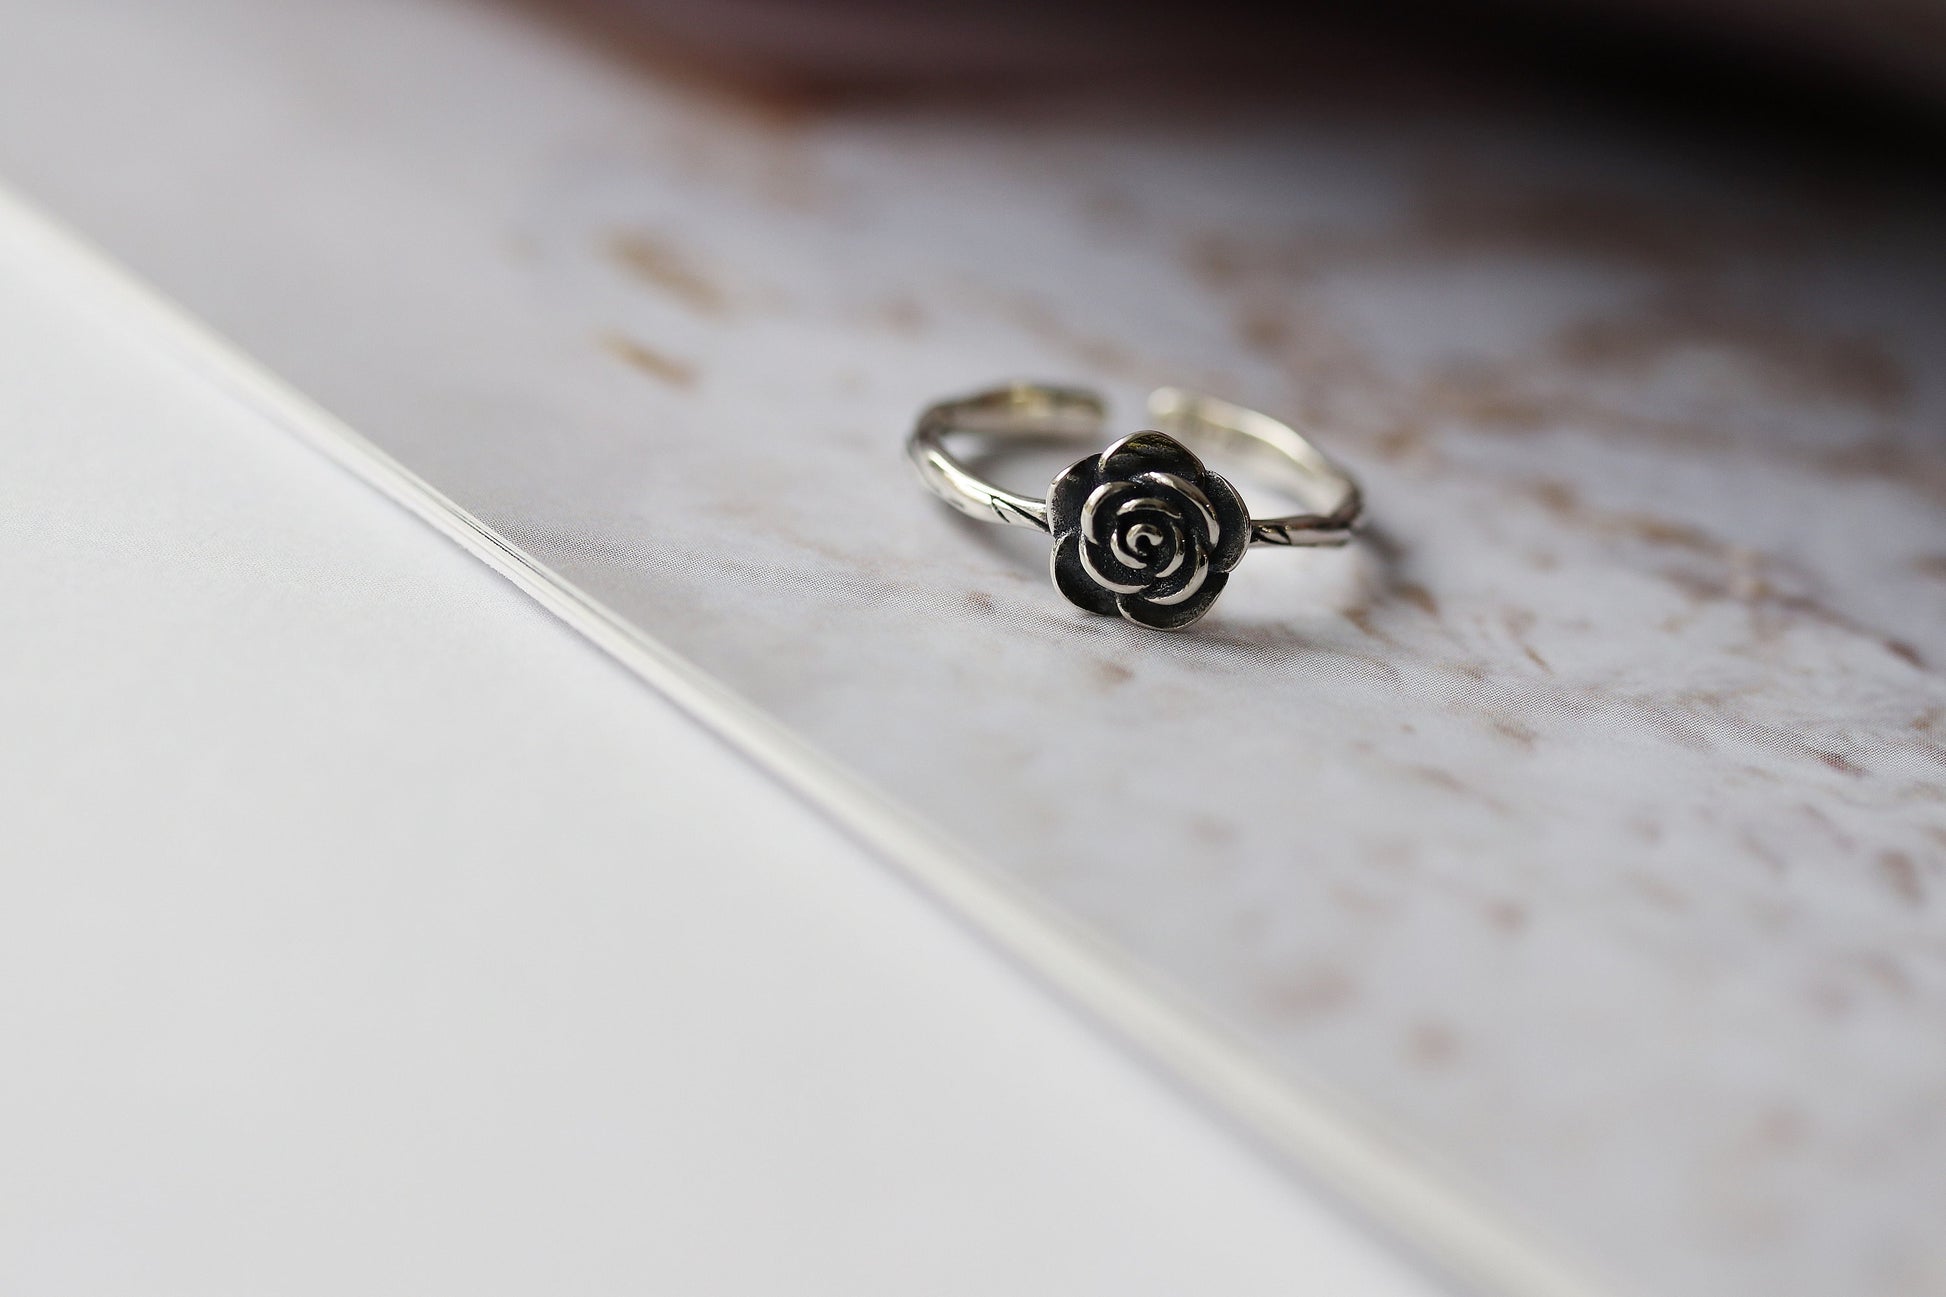 Solid Silver Handmade Rose Ring, Vintage Floral Open Ring, Modern Minimalist Adjustable Stacking Ring,Girlfriend Birthday Gift, Gift for Her